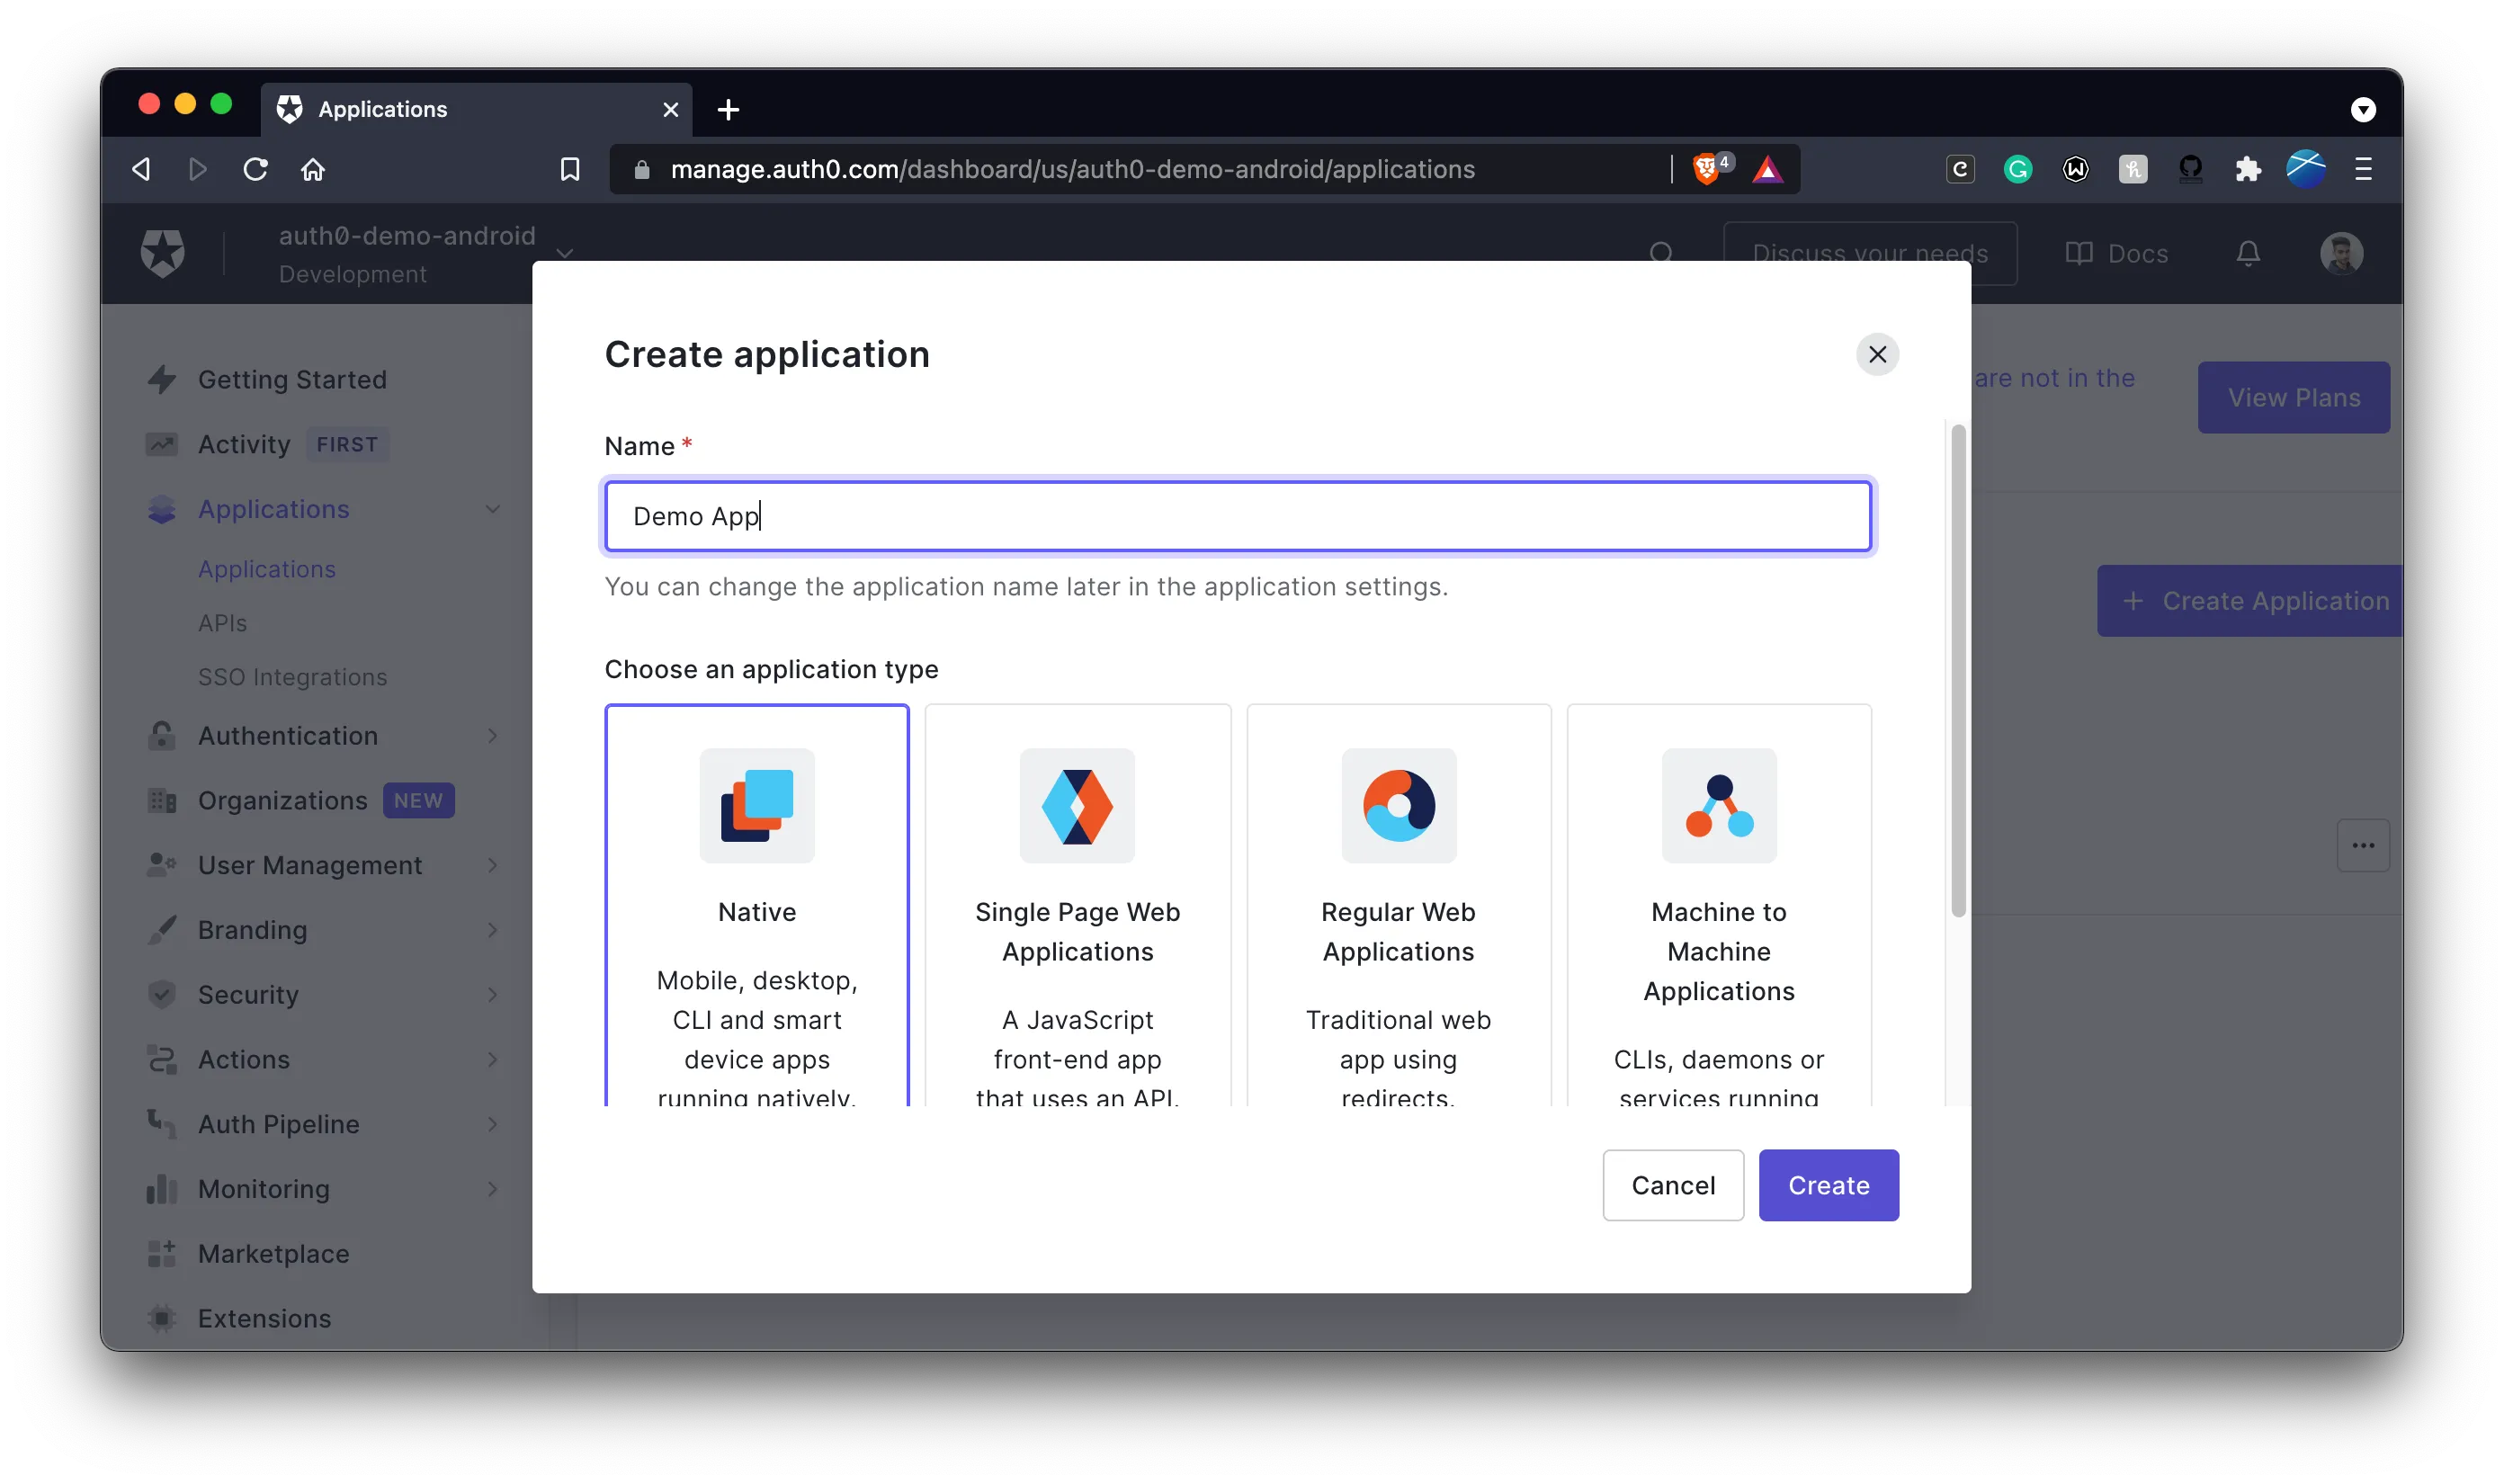 Creating a new app in auth0 dashboard